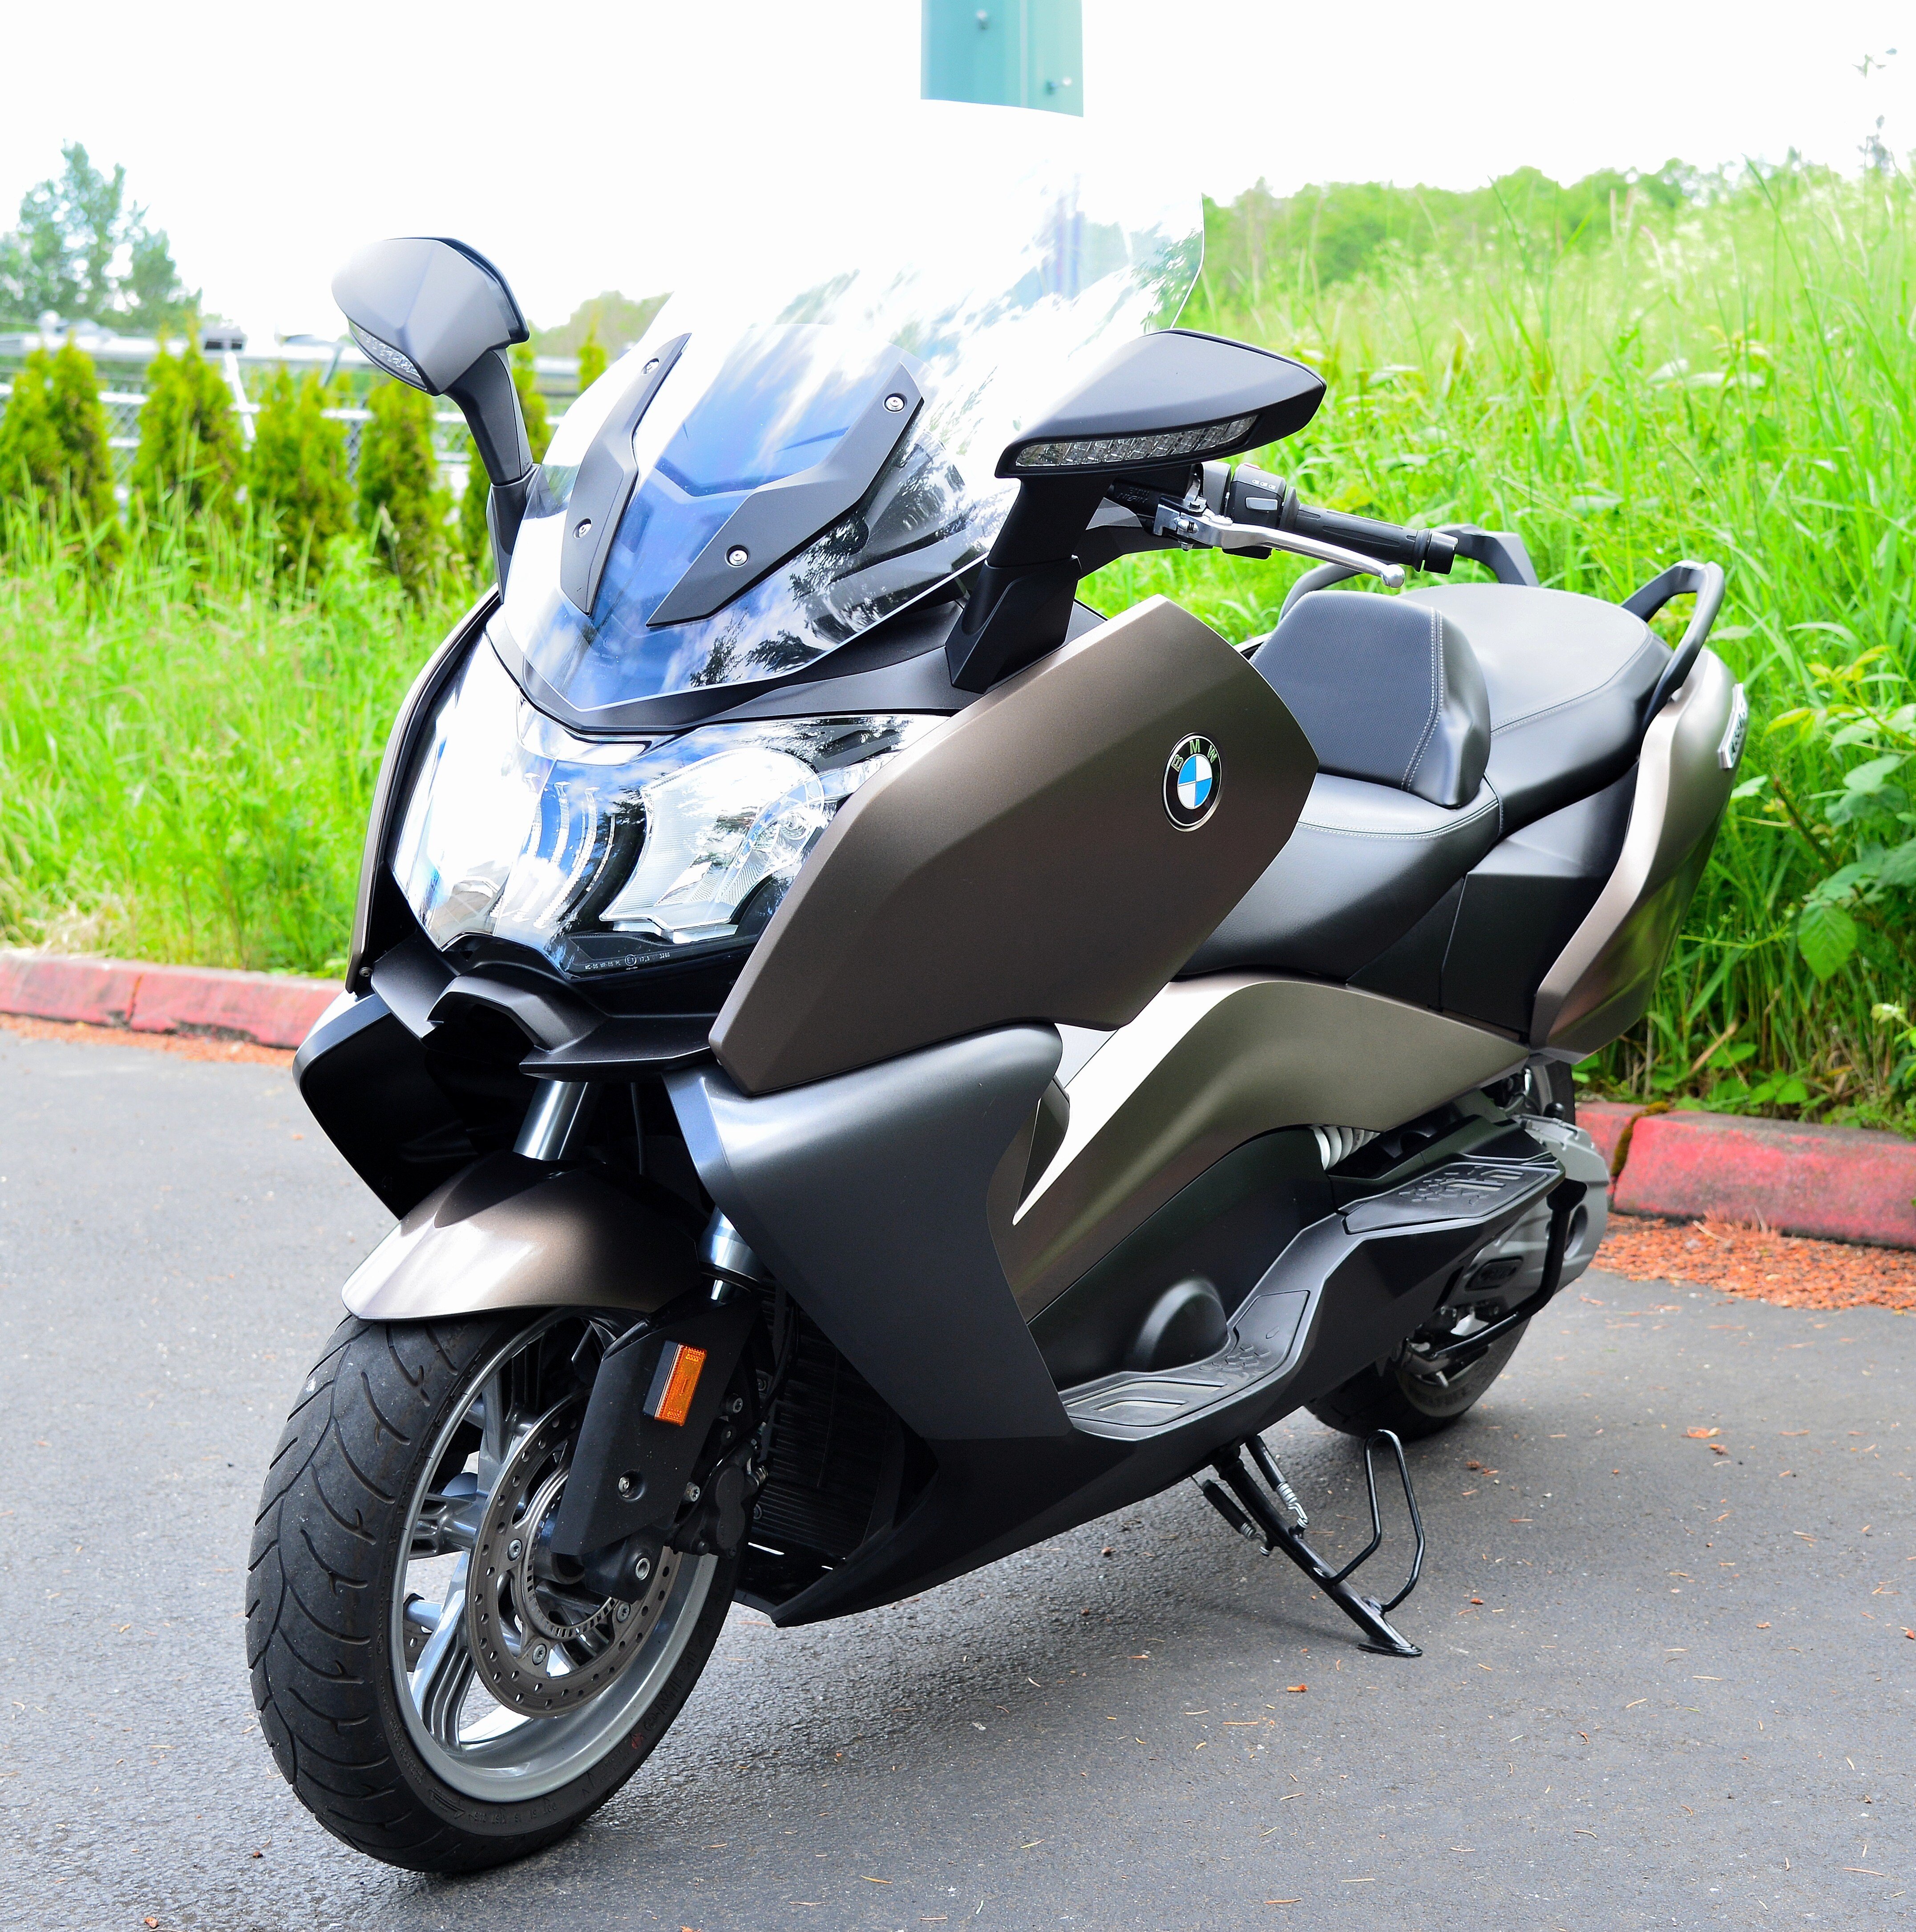 BMW Motorcycles for Sale near Seattle, Washington - Motorcycles on Autotrader